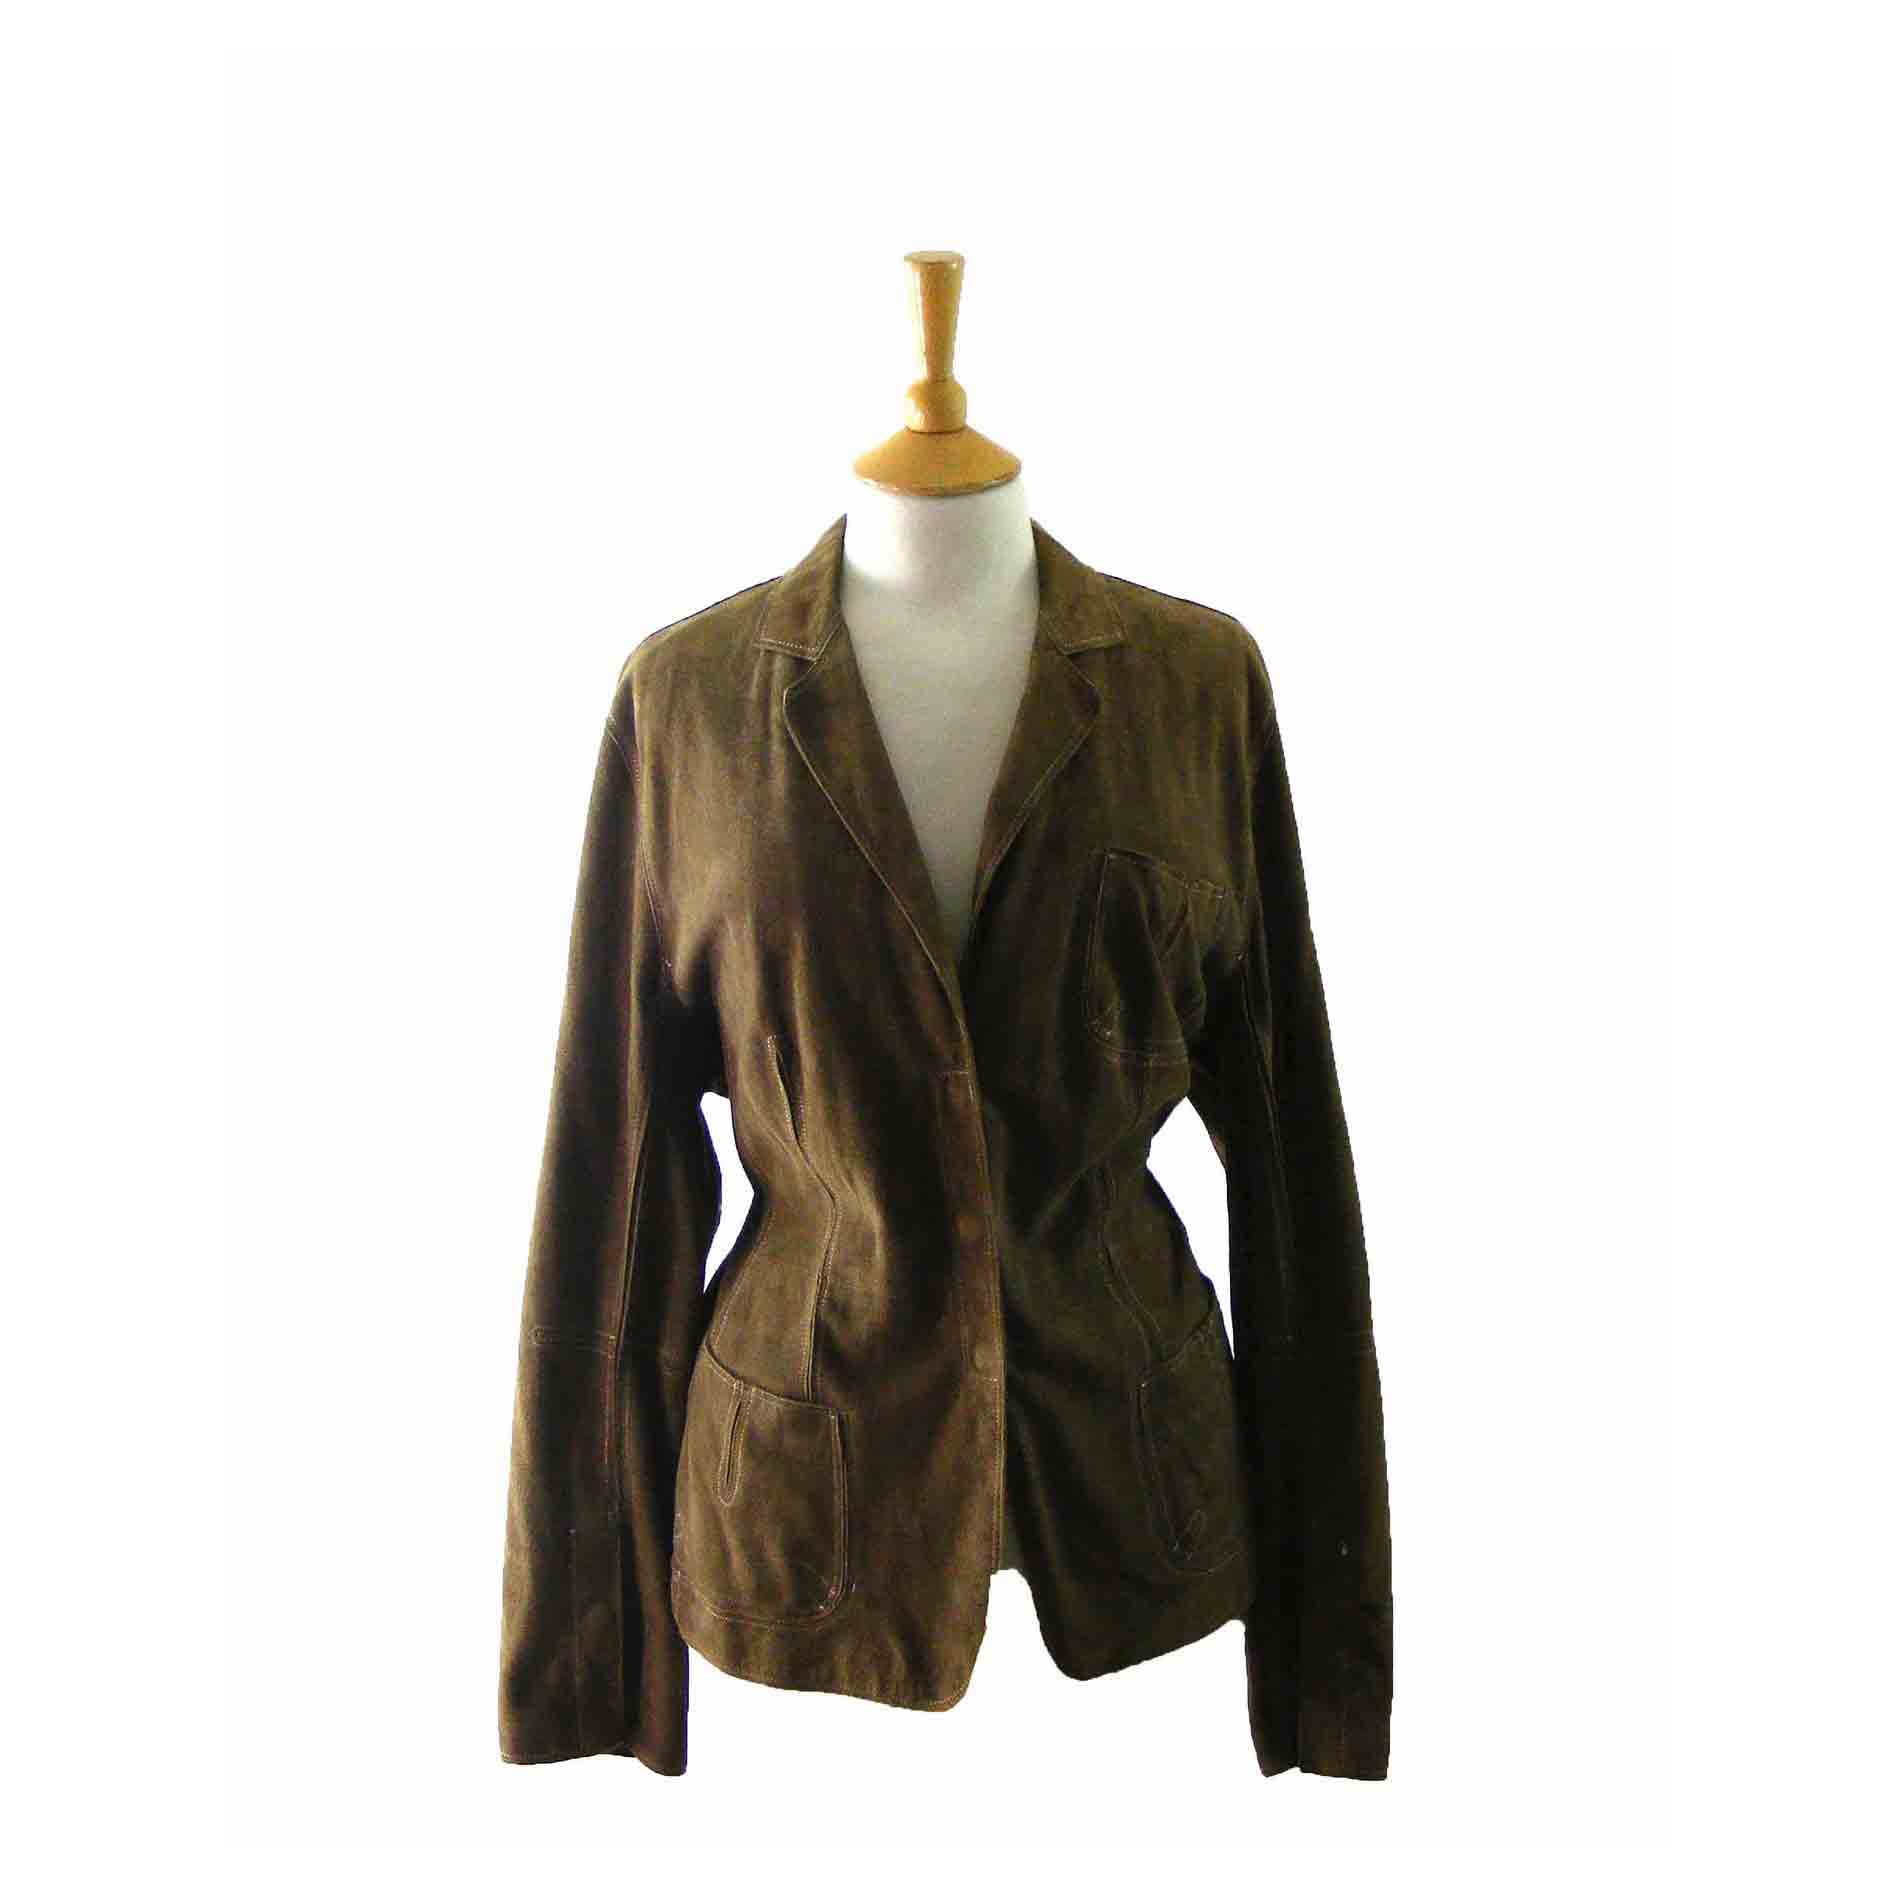 Vintage Womens jackets | blue17.co.uk/vintage-womens-clothing/womens ...